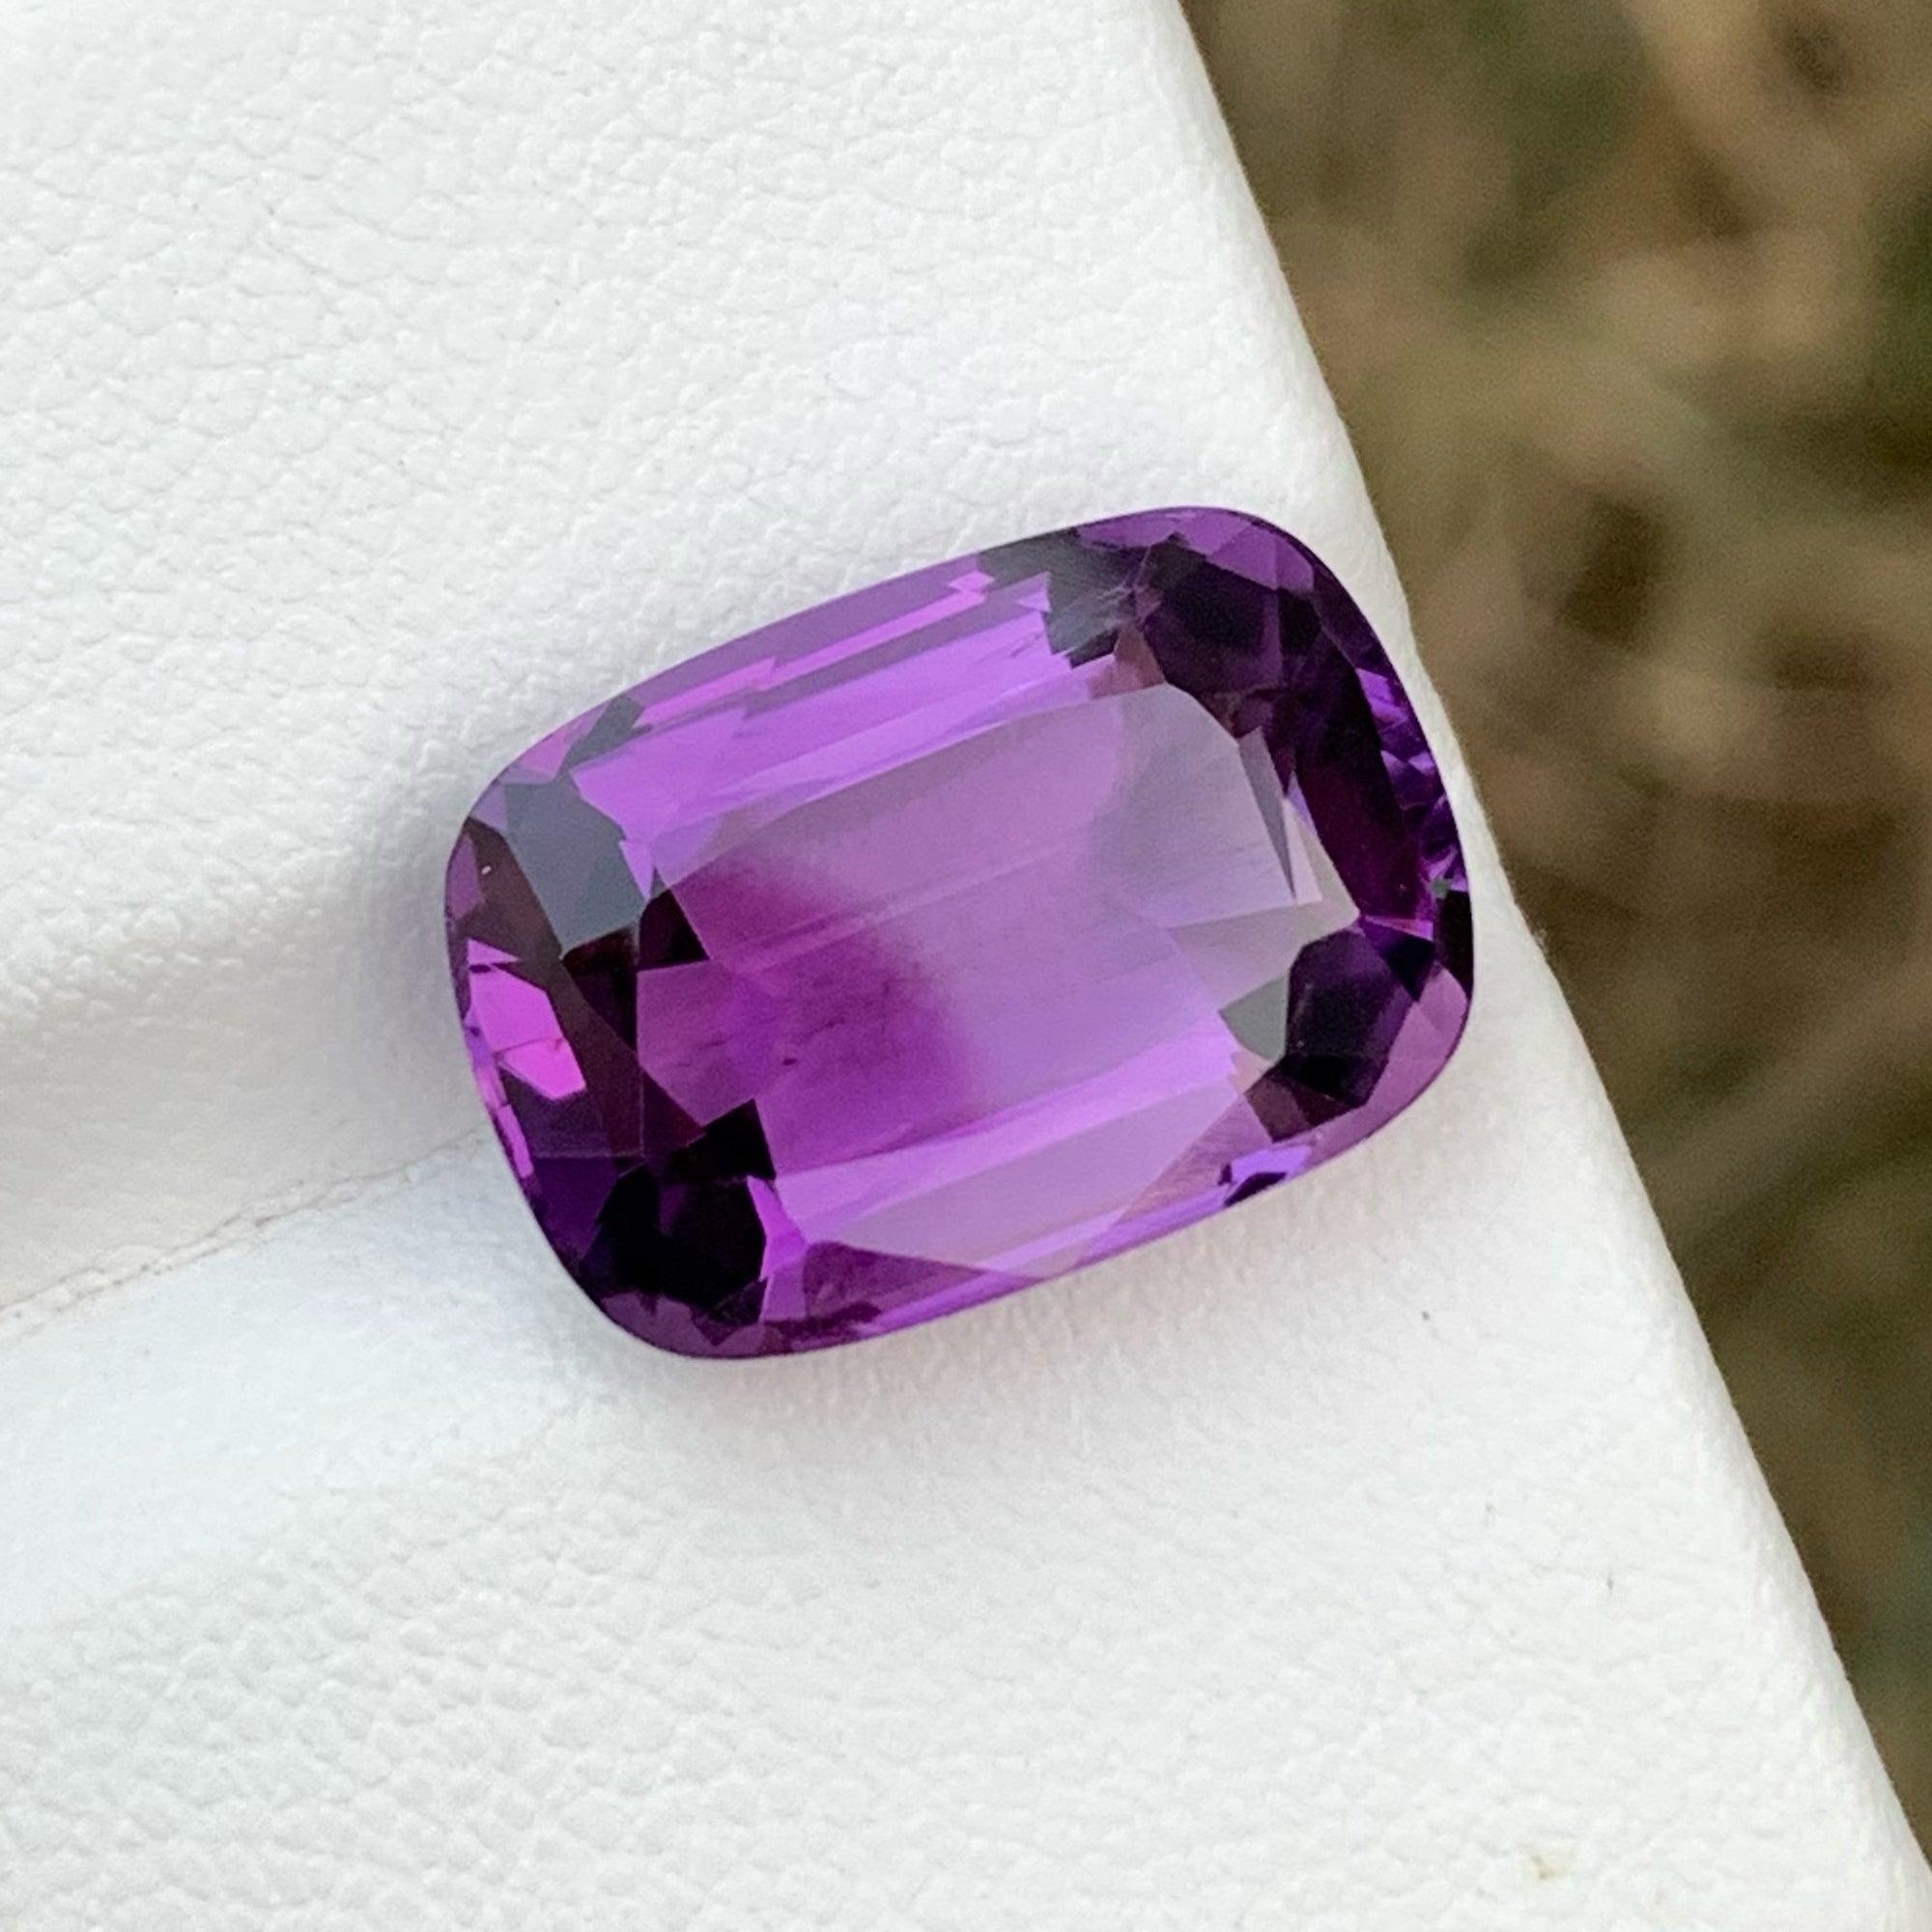 Fantastic Purple Amethyst Loose Gem, Available for sale at wholesale price natural high quality at 9.30 Carats Vvs Clarity Natural Loose Amethyst From Africa.
 
Product Information:
GEMSTONE TYPE:	Fantastic Purple Amethyst Loose Gem
WEIGHT:	9.30